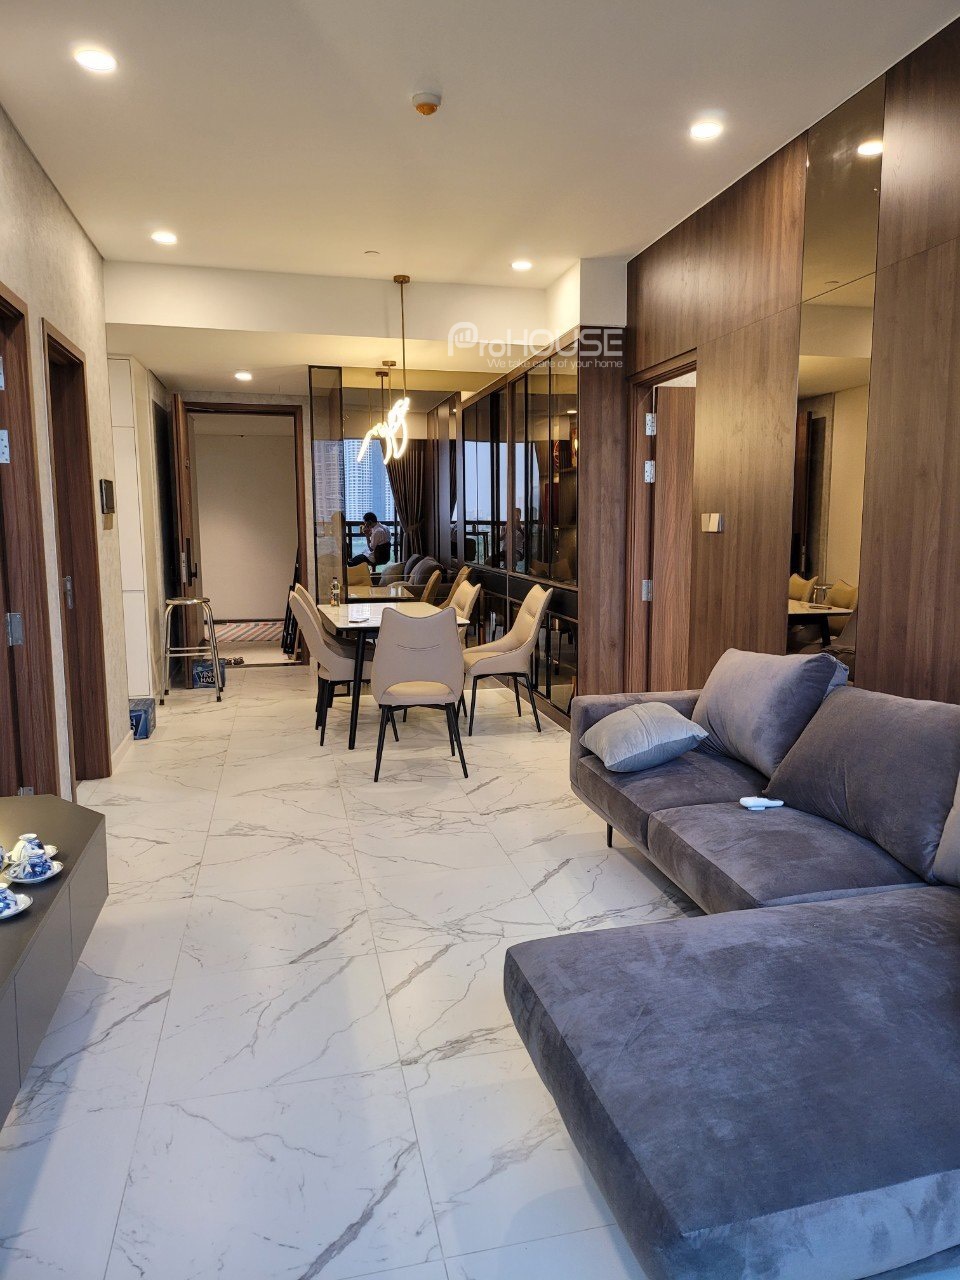 Luxury 2 bedroom apartment for rent in The Metropole Thu Thiem with full furniture